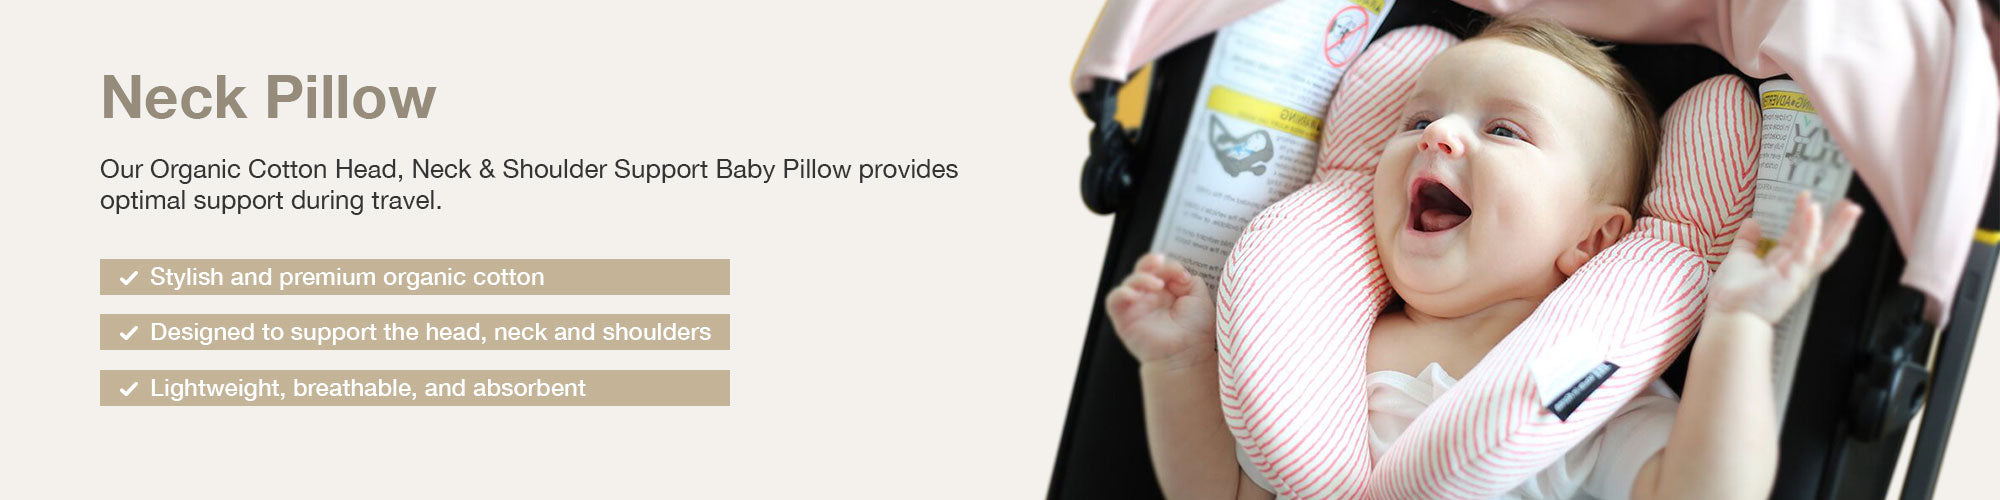 Baby Travel Neck Pillow for Head and Shoulder Support